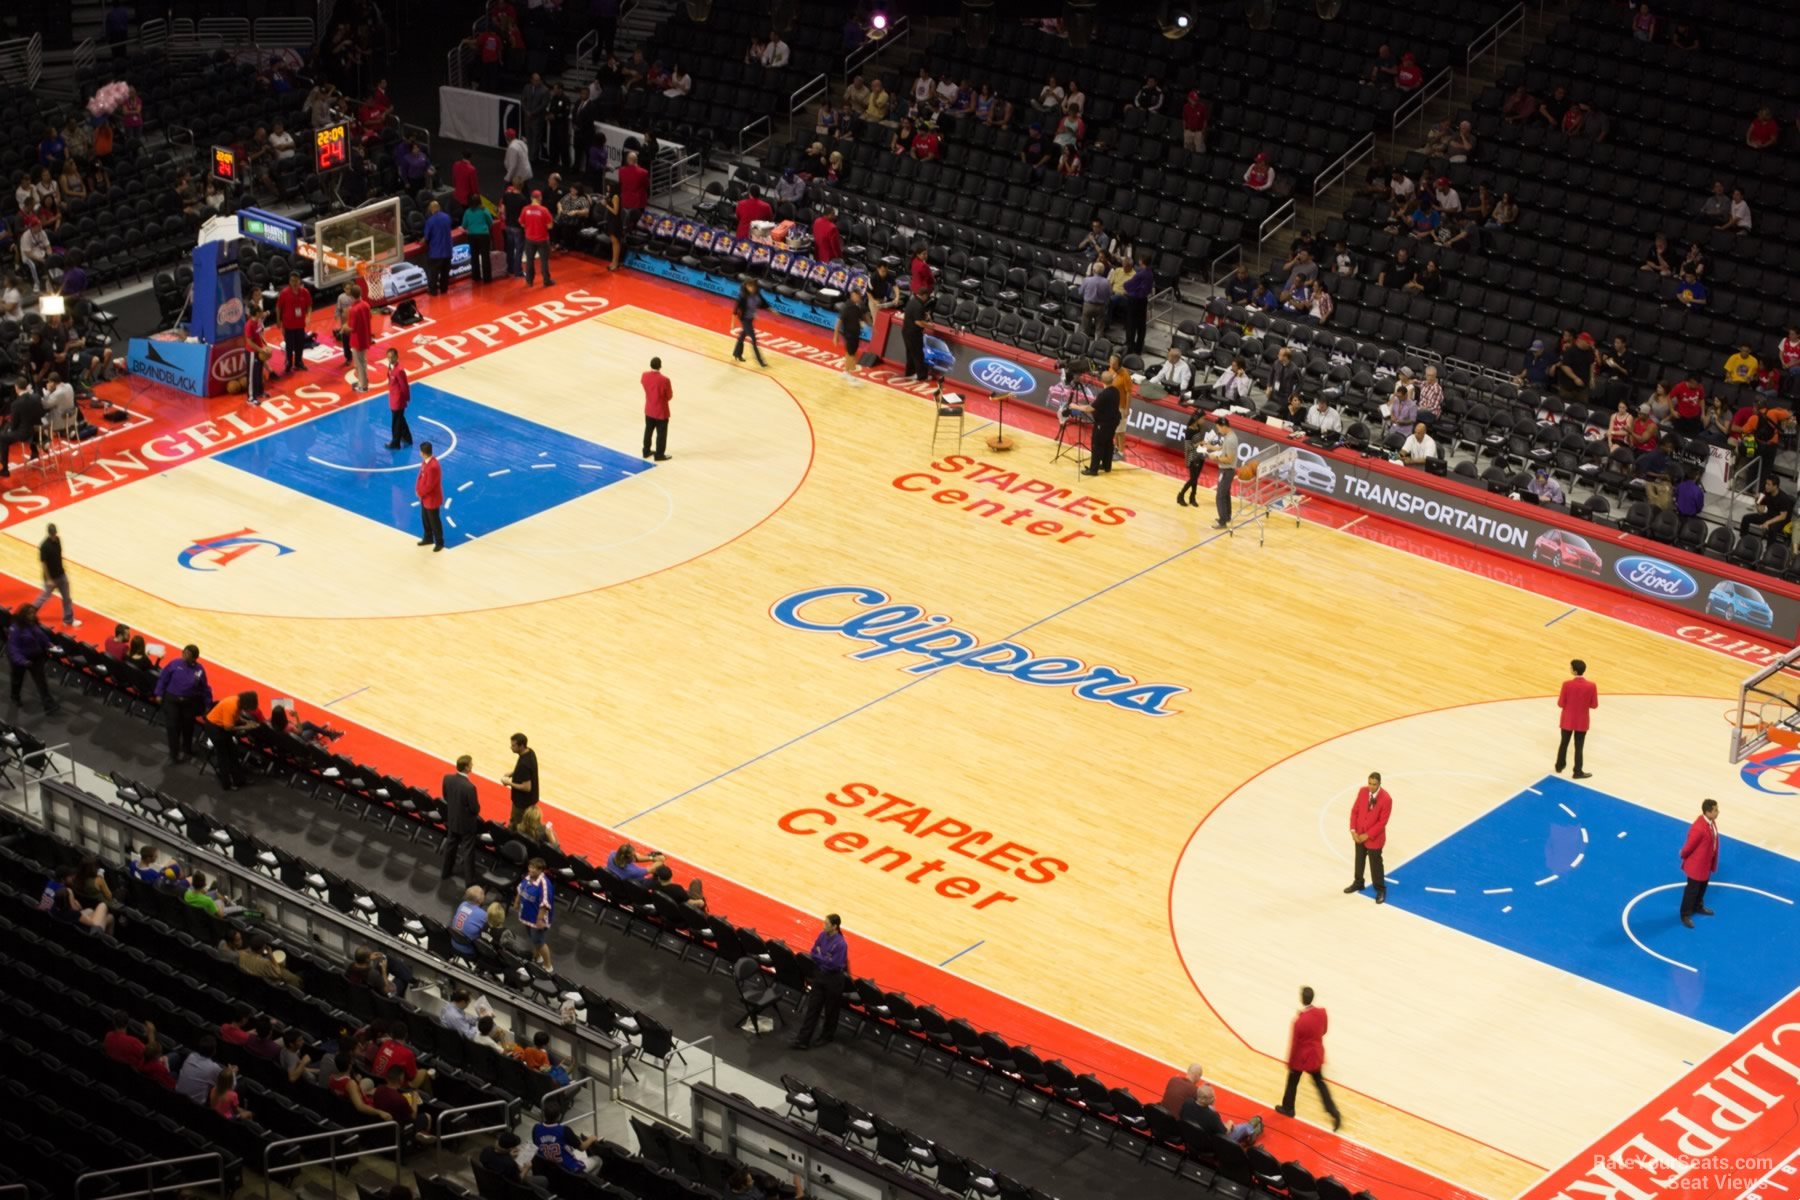 section 315, row 6 seat view  for basketball - crypto.com arena